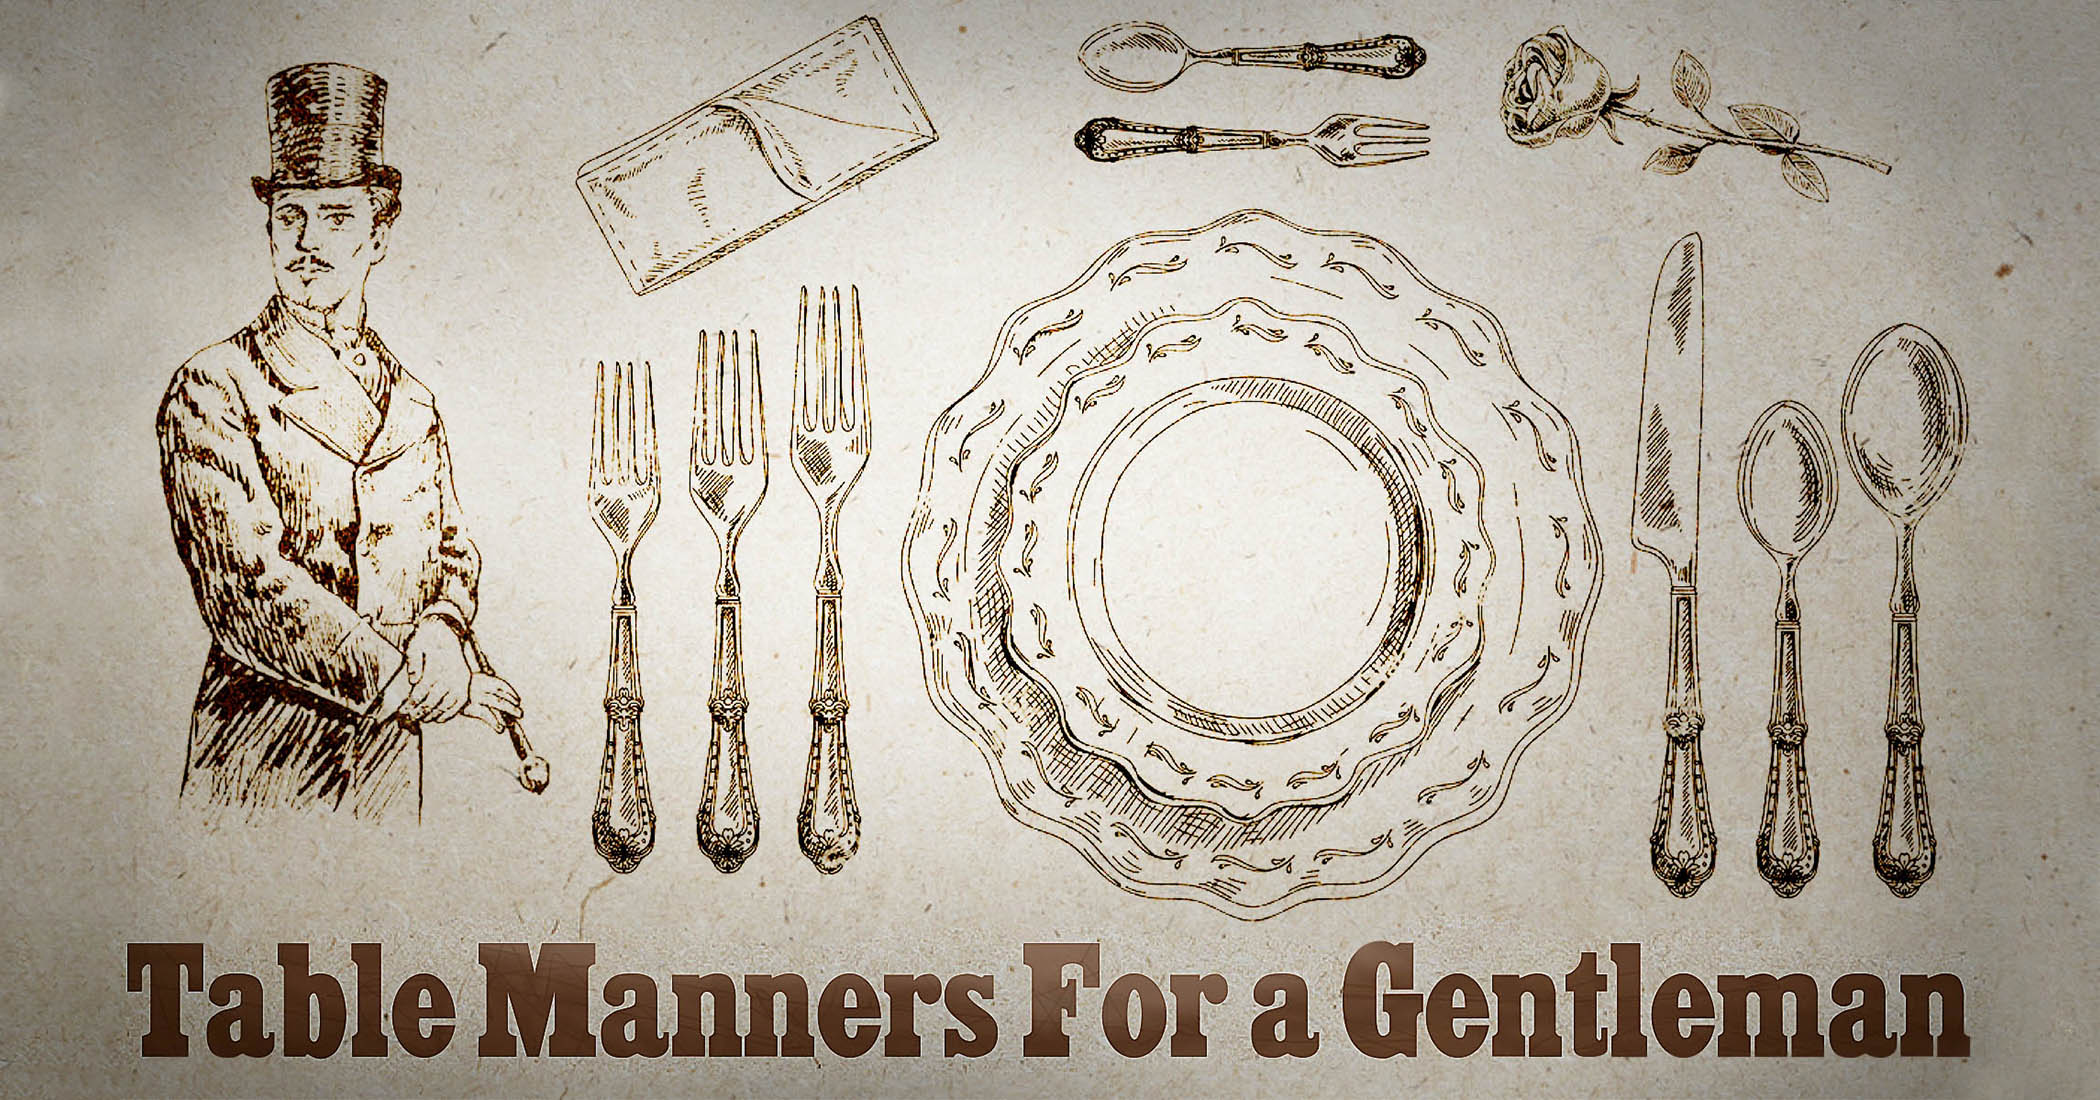 How to Have Table Manners Like a Gentleman From an 1800s Manual on ...